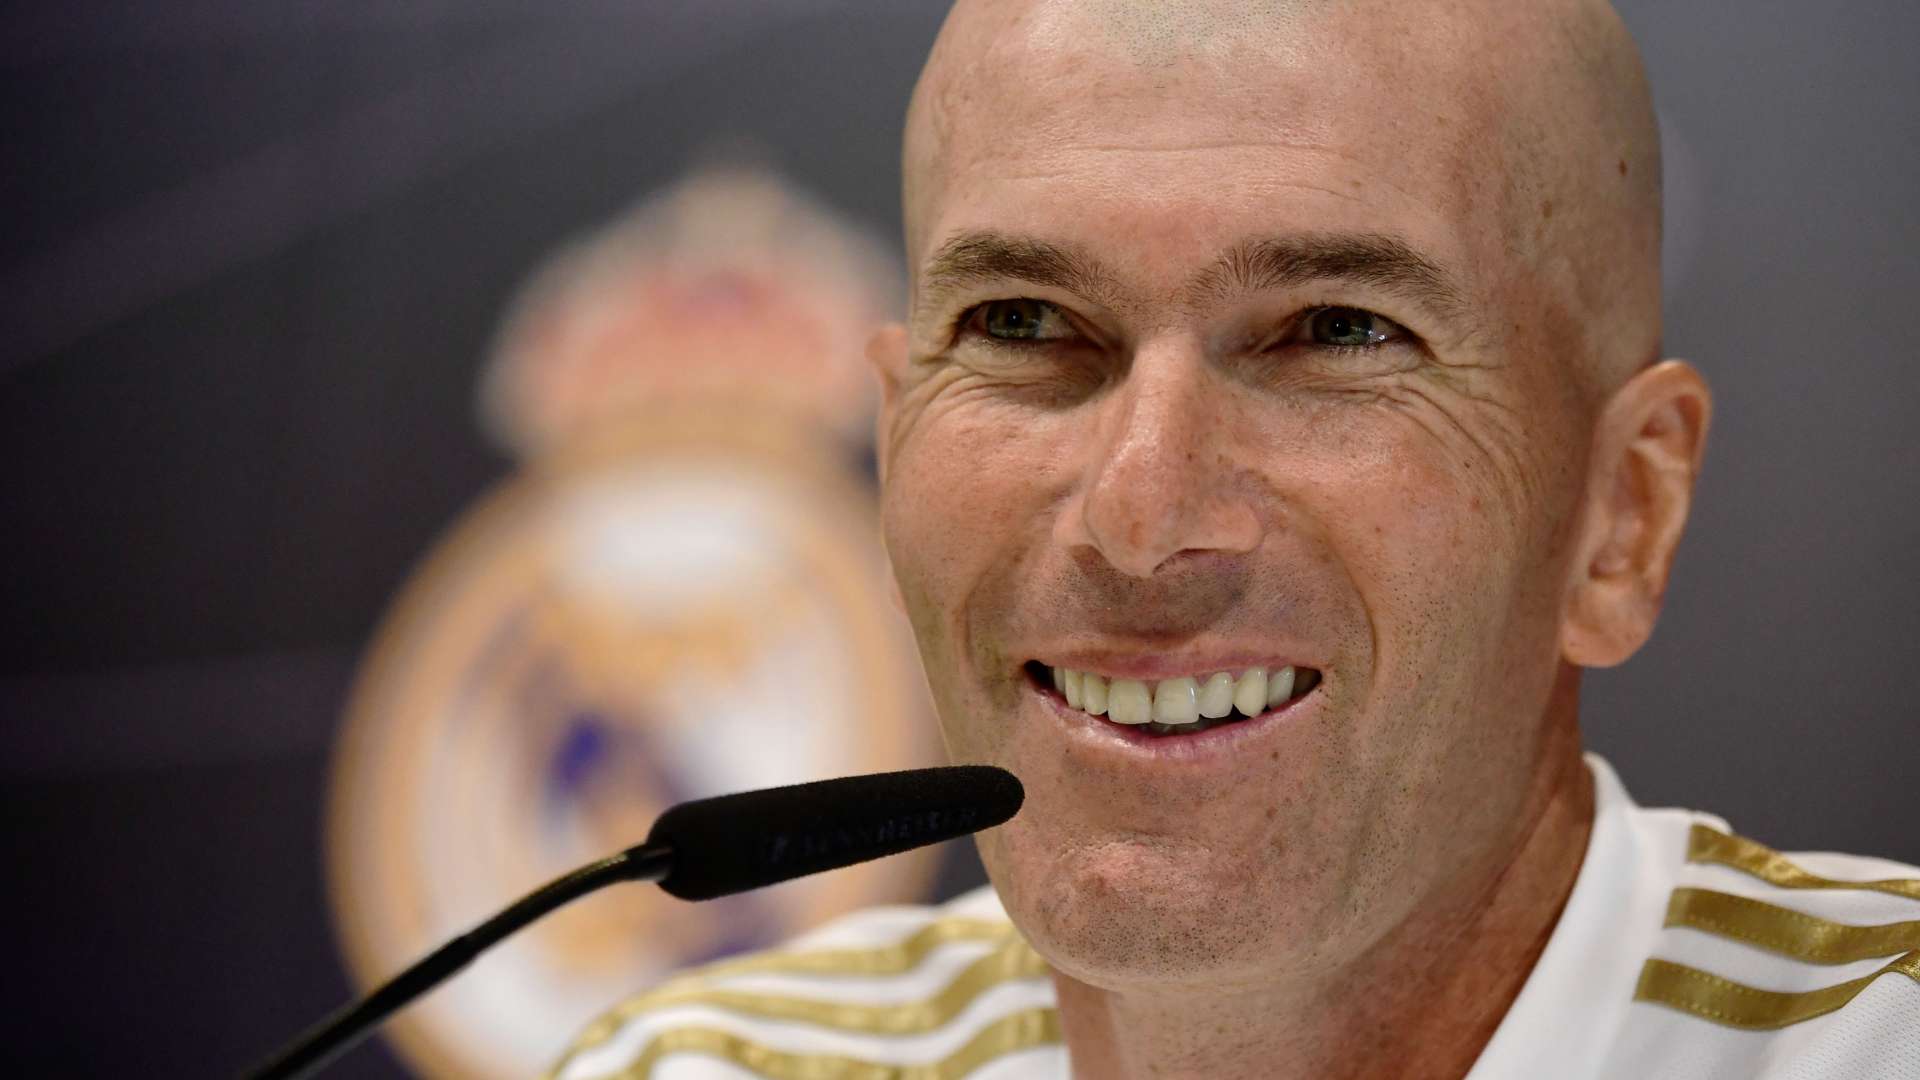 Zinedine Zidane, Real Madrid coach, during a press conference in 2019-20 season